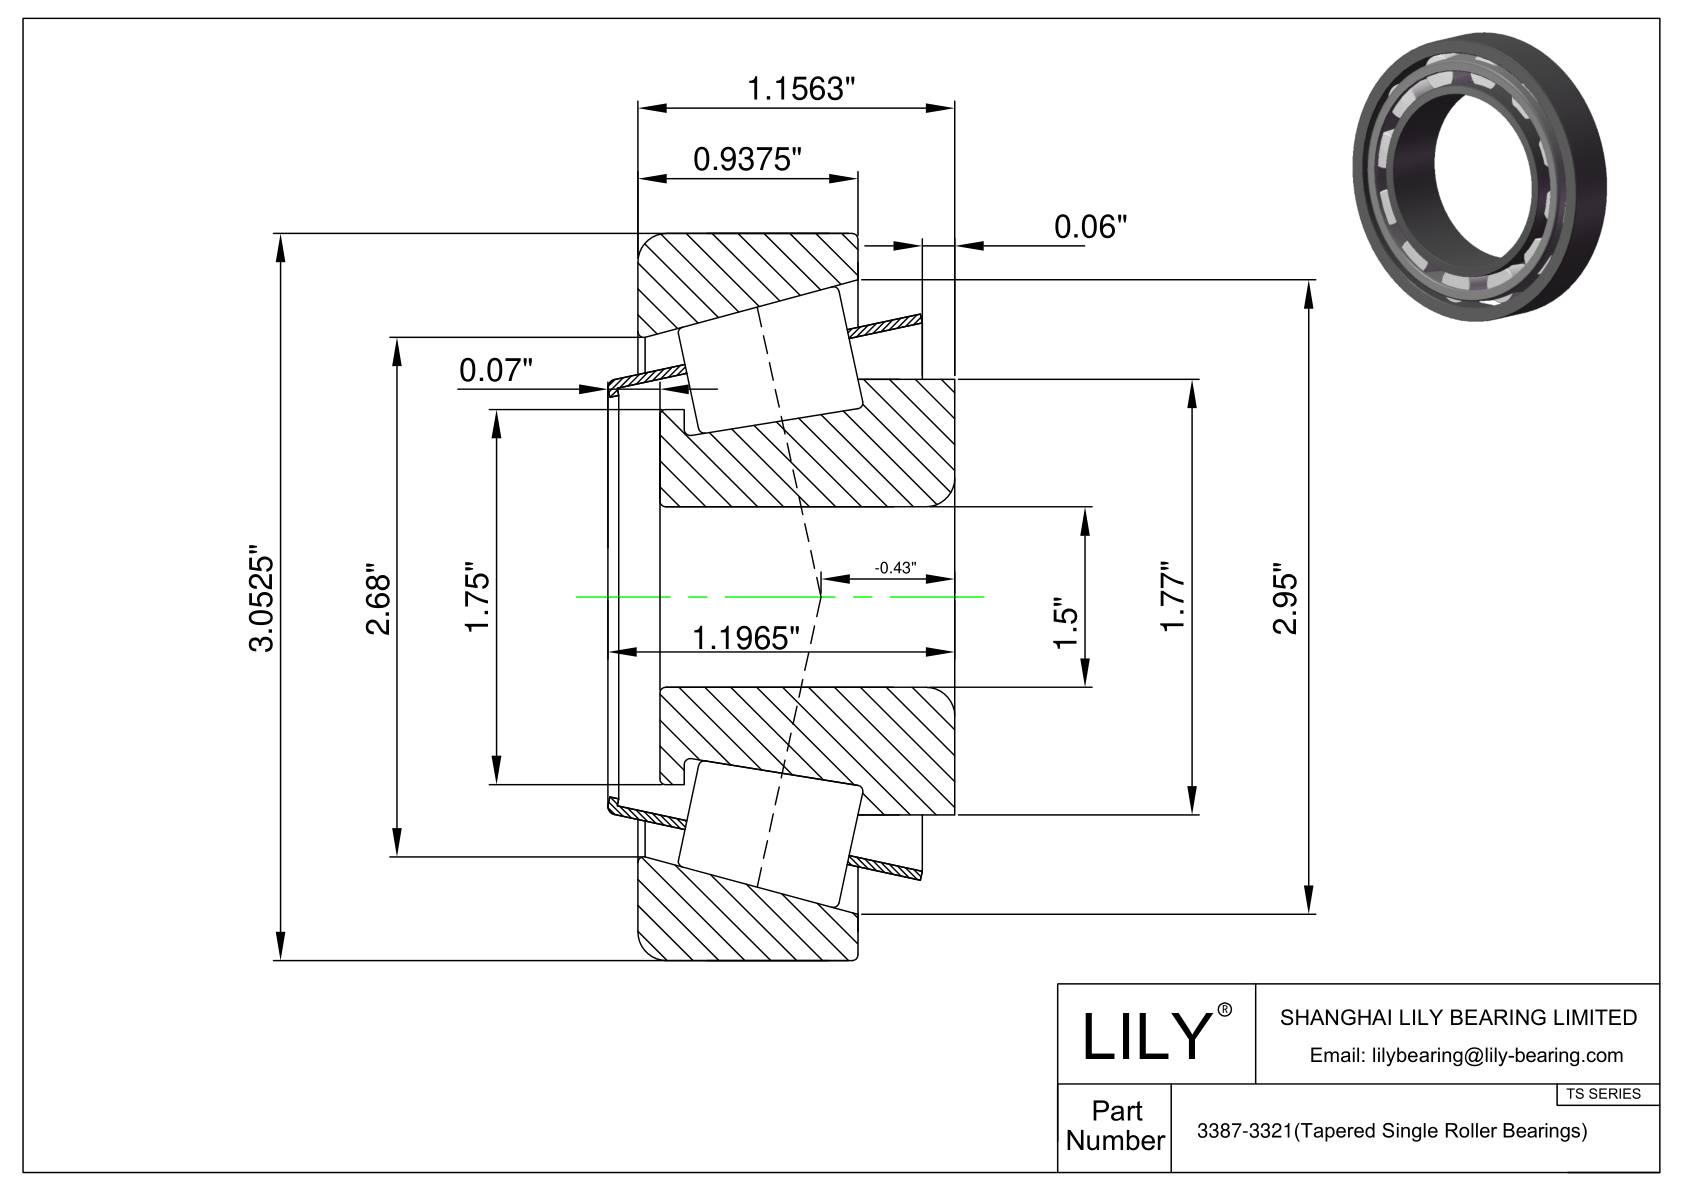 3387-3321 TS (Tapered Single Roller Bearings) (Imperial) cad drawing